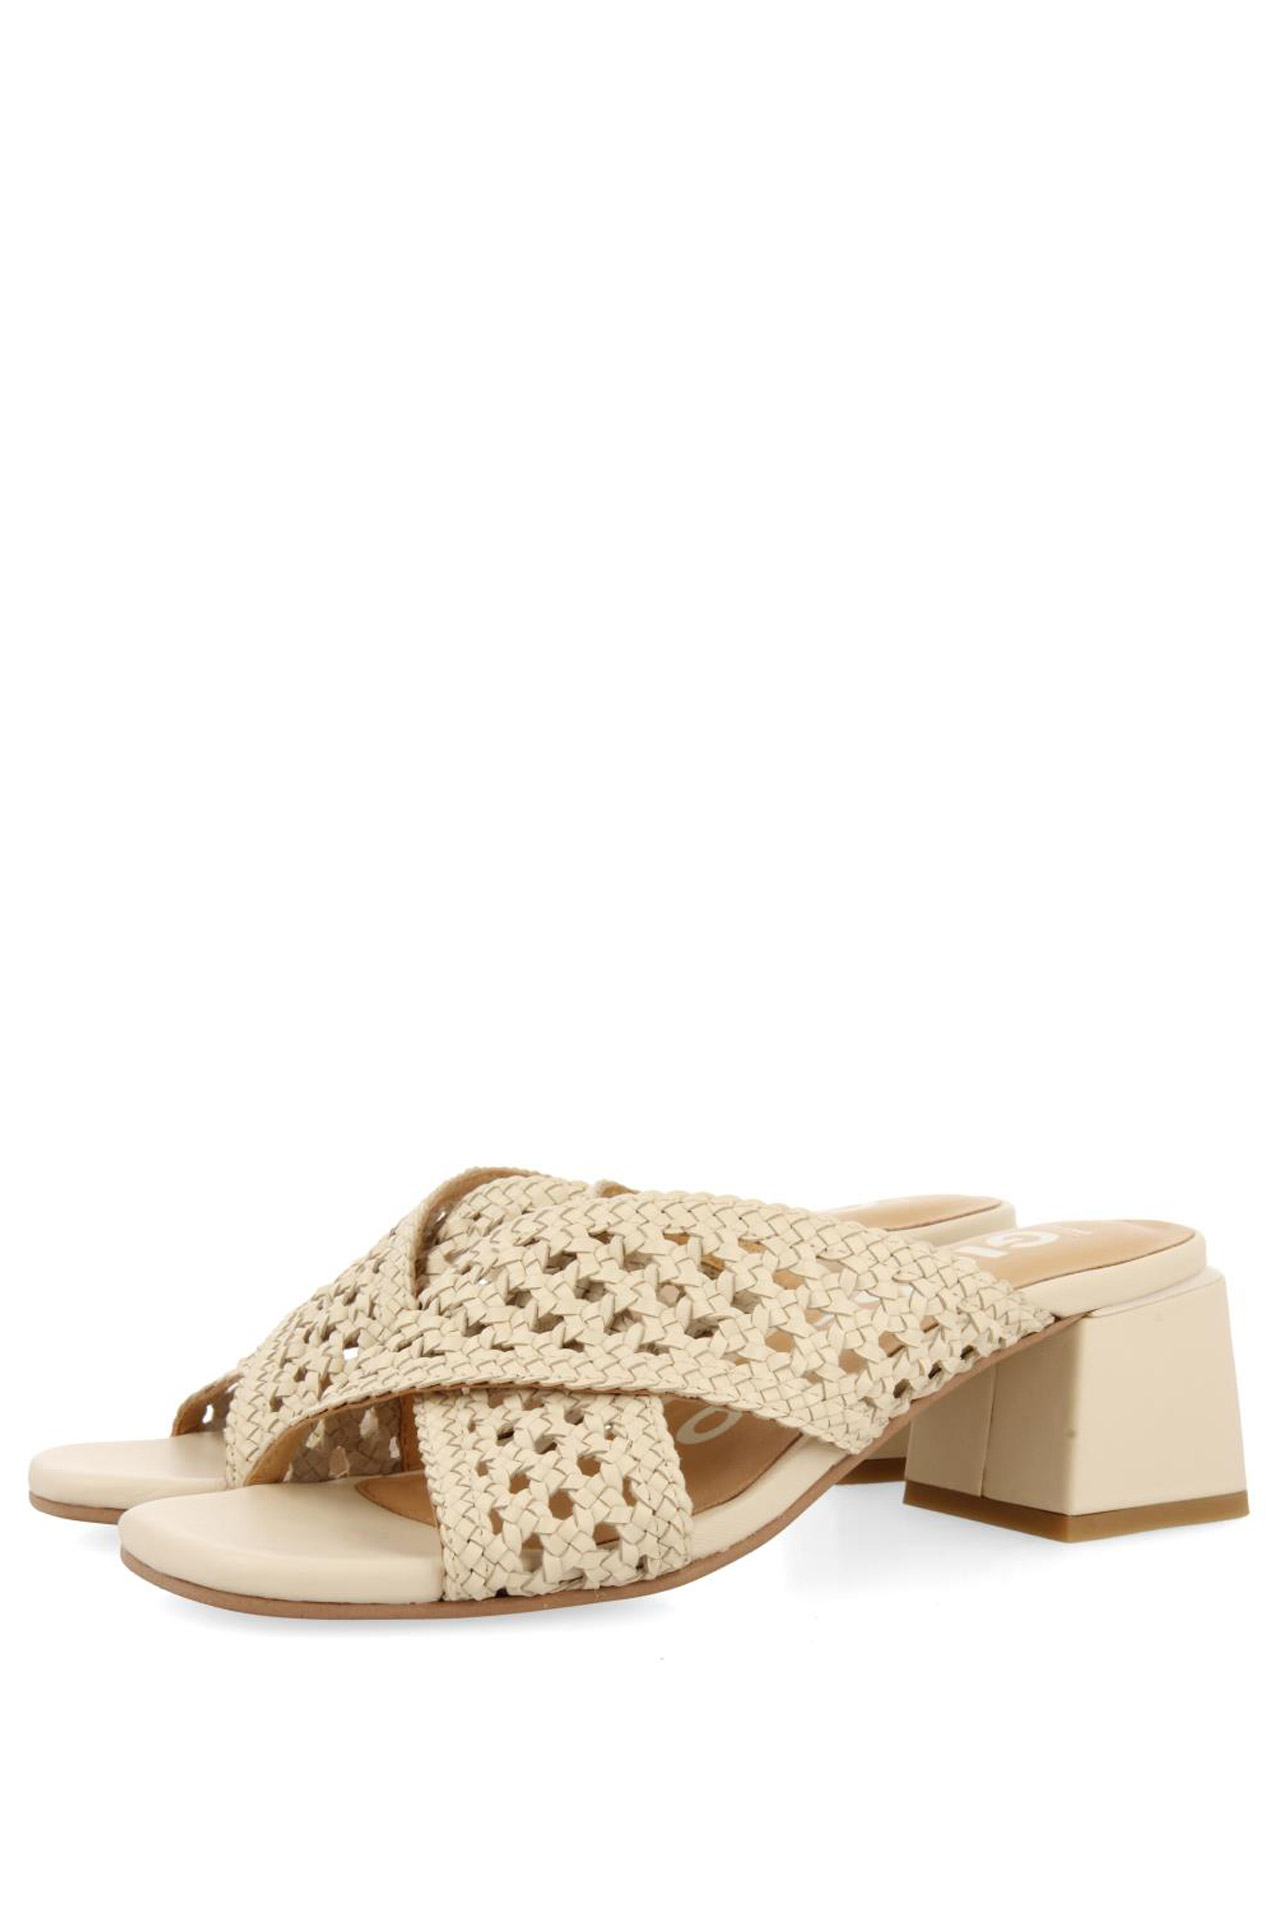 GIOSEPPO CLARCONA OPEN-TOE OFF-WHITE SANDALS WITH BRAIDED DETAILS